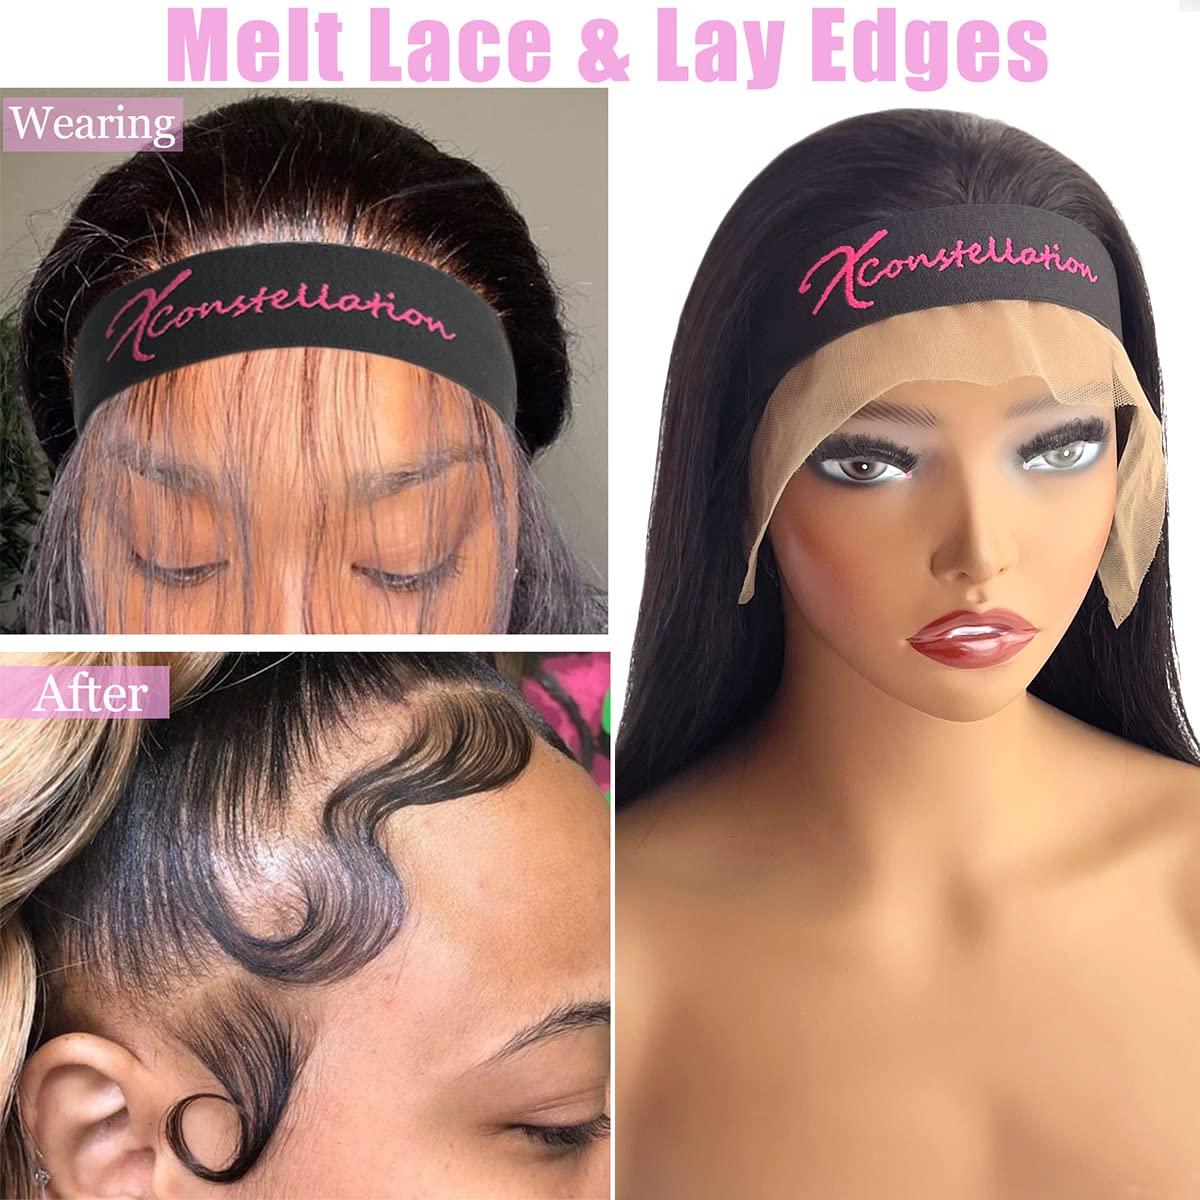 2PCS Elastic Band for Wigs Edges Lace Melting Bands Edge laying